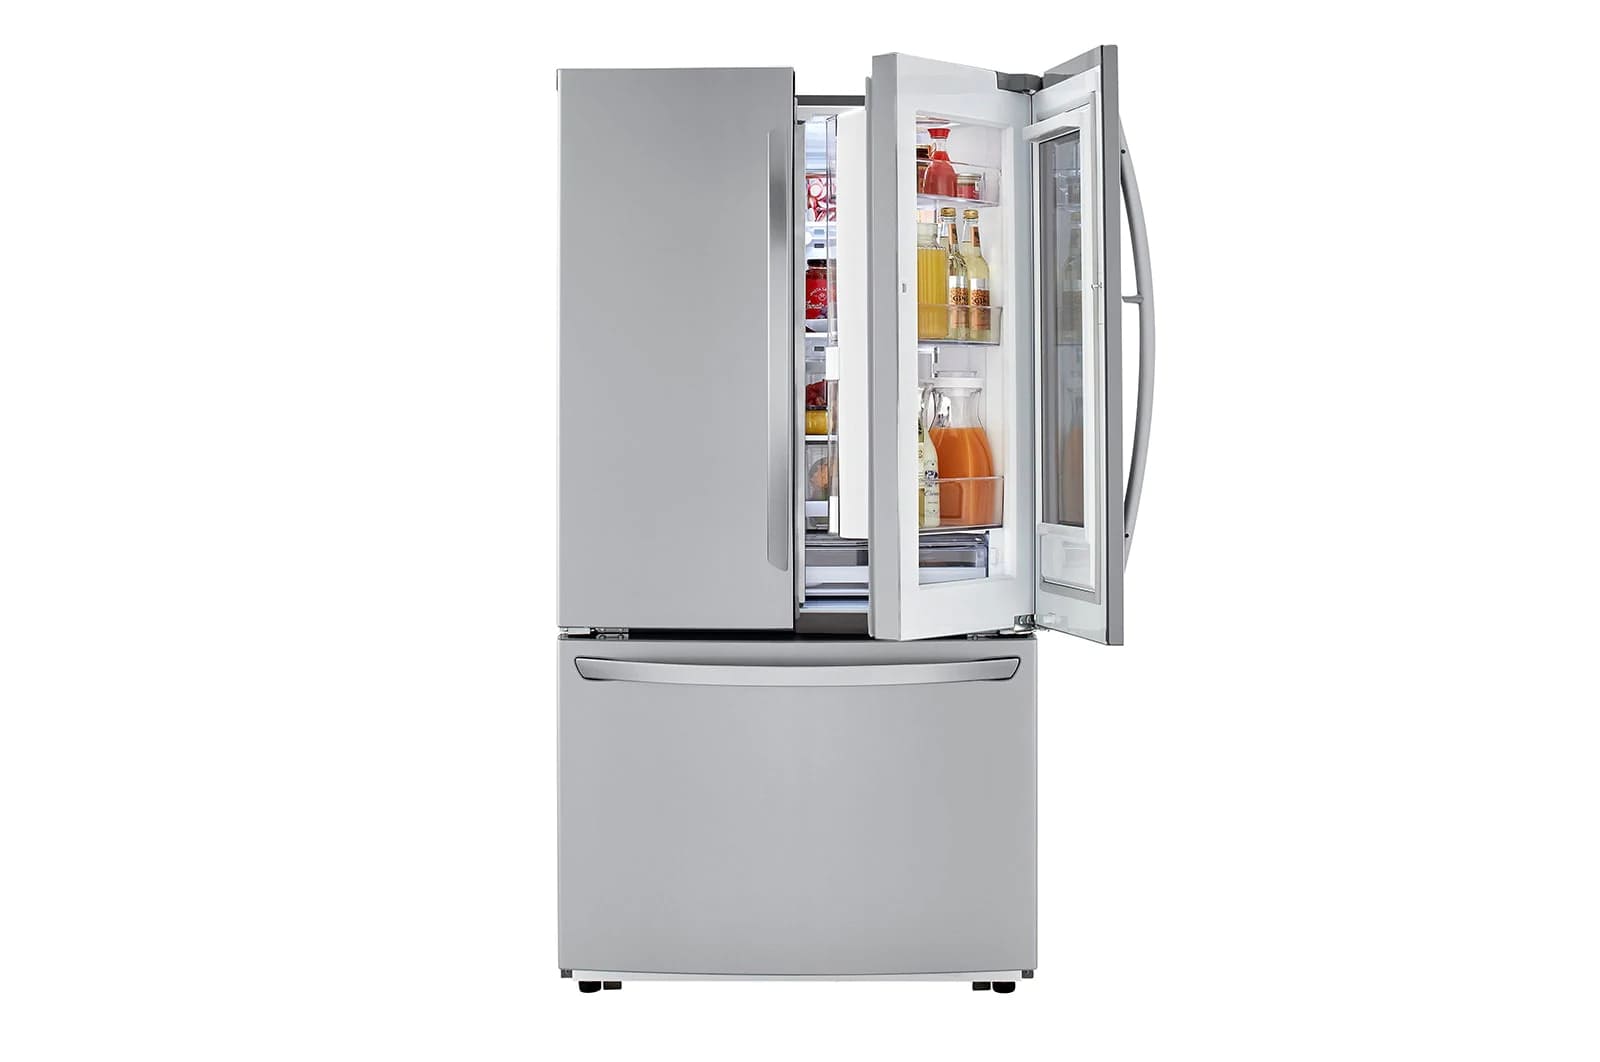 LG - 35.75 Inch 22.8 cu. ft French Door Refrigerator in Stainless - LFCC23596S